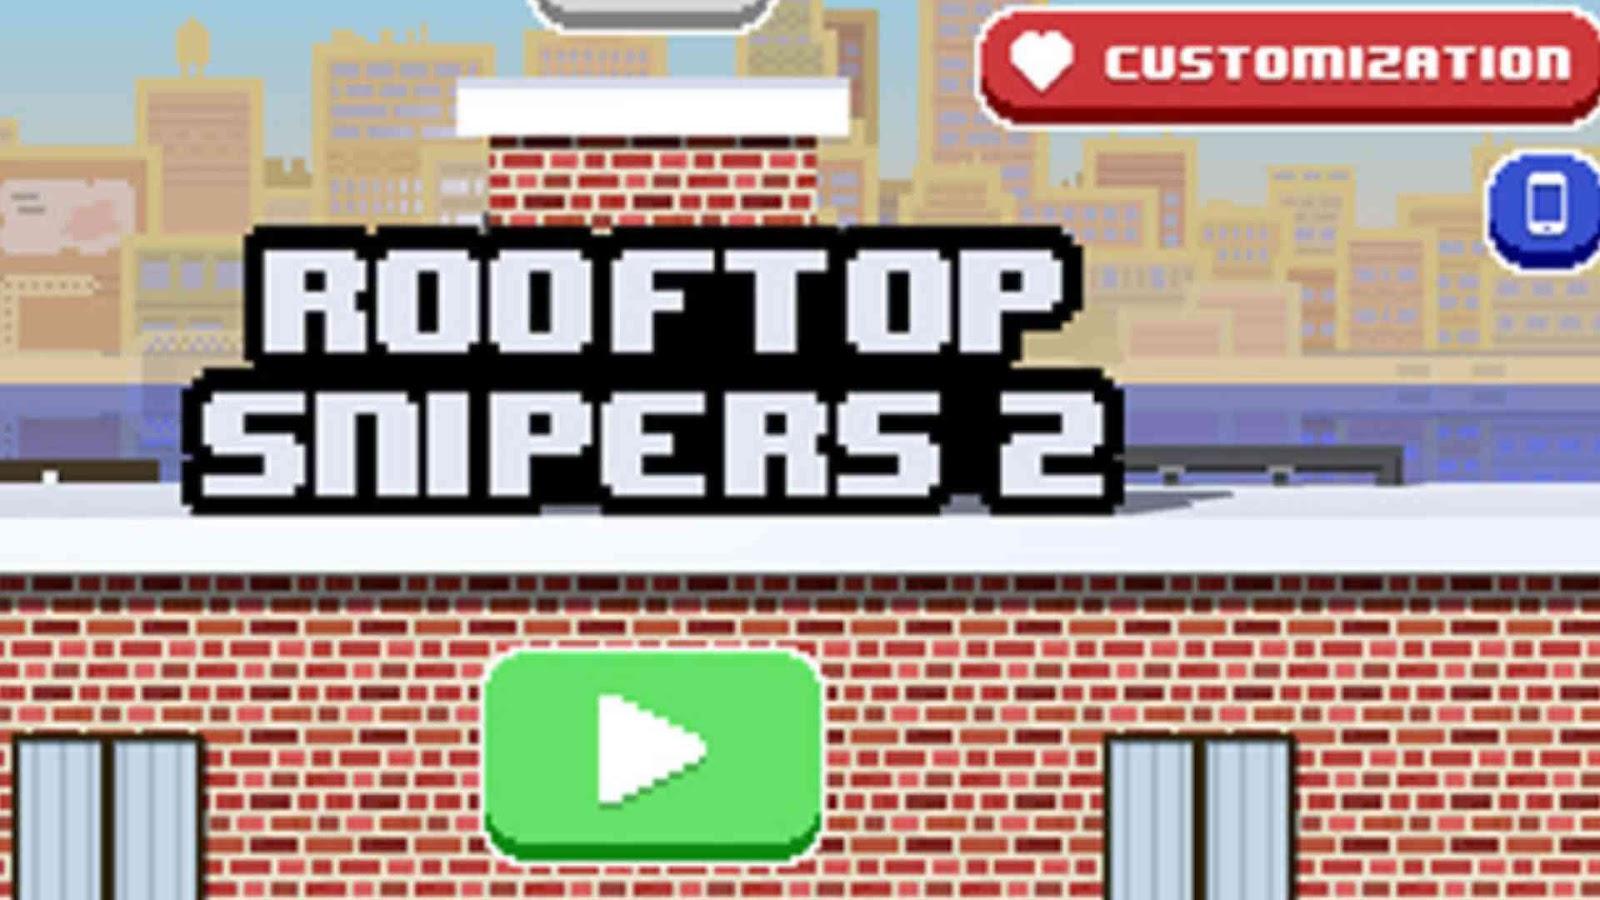 Top 20 HTML5 Games Unblocked – Play Anywhere You Want-LDPlayer's